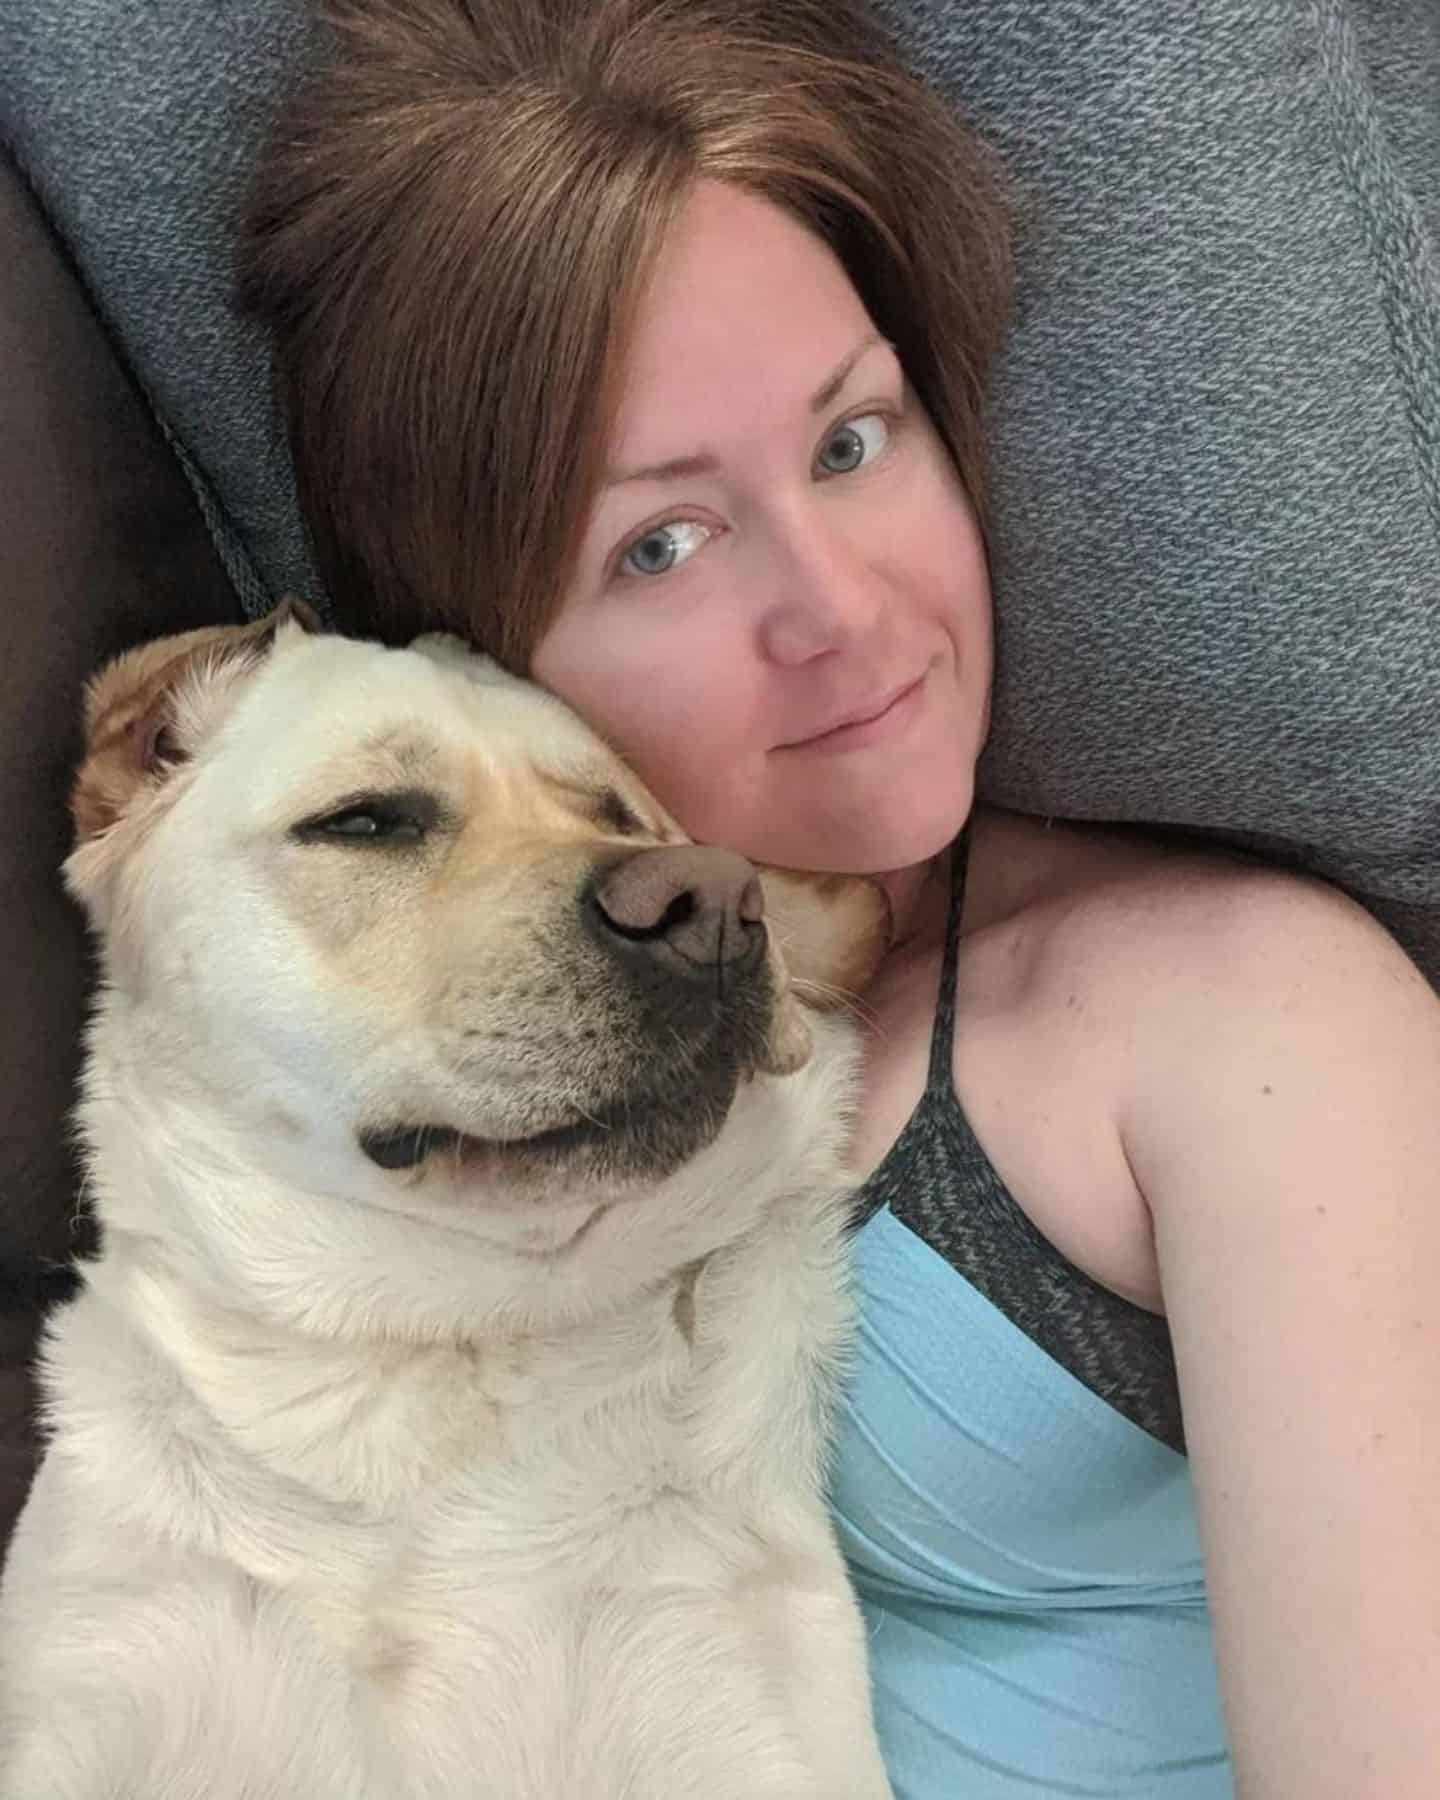 woman posing with dog on the couch